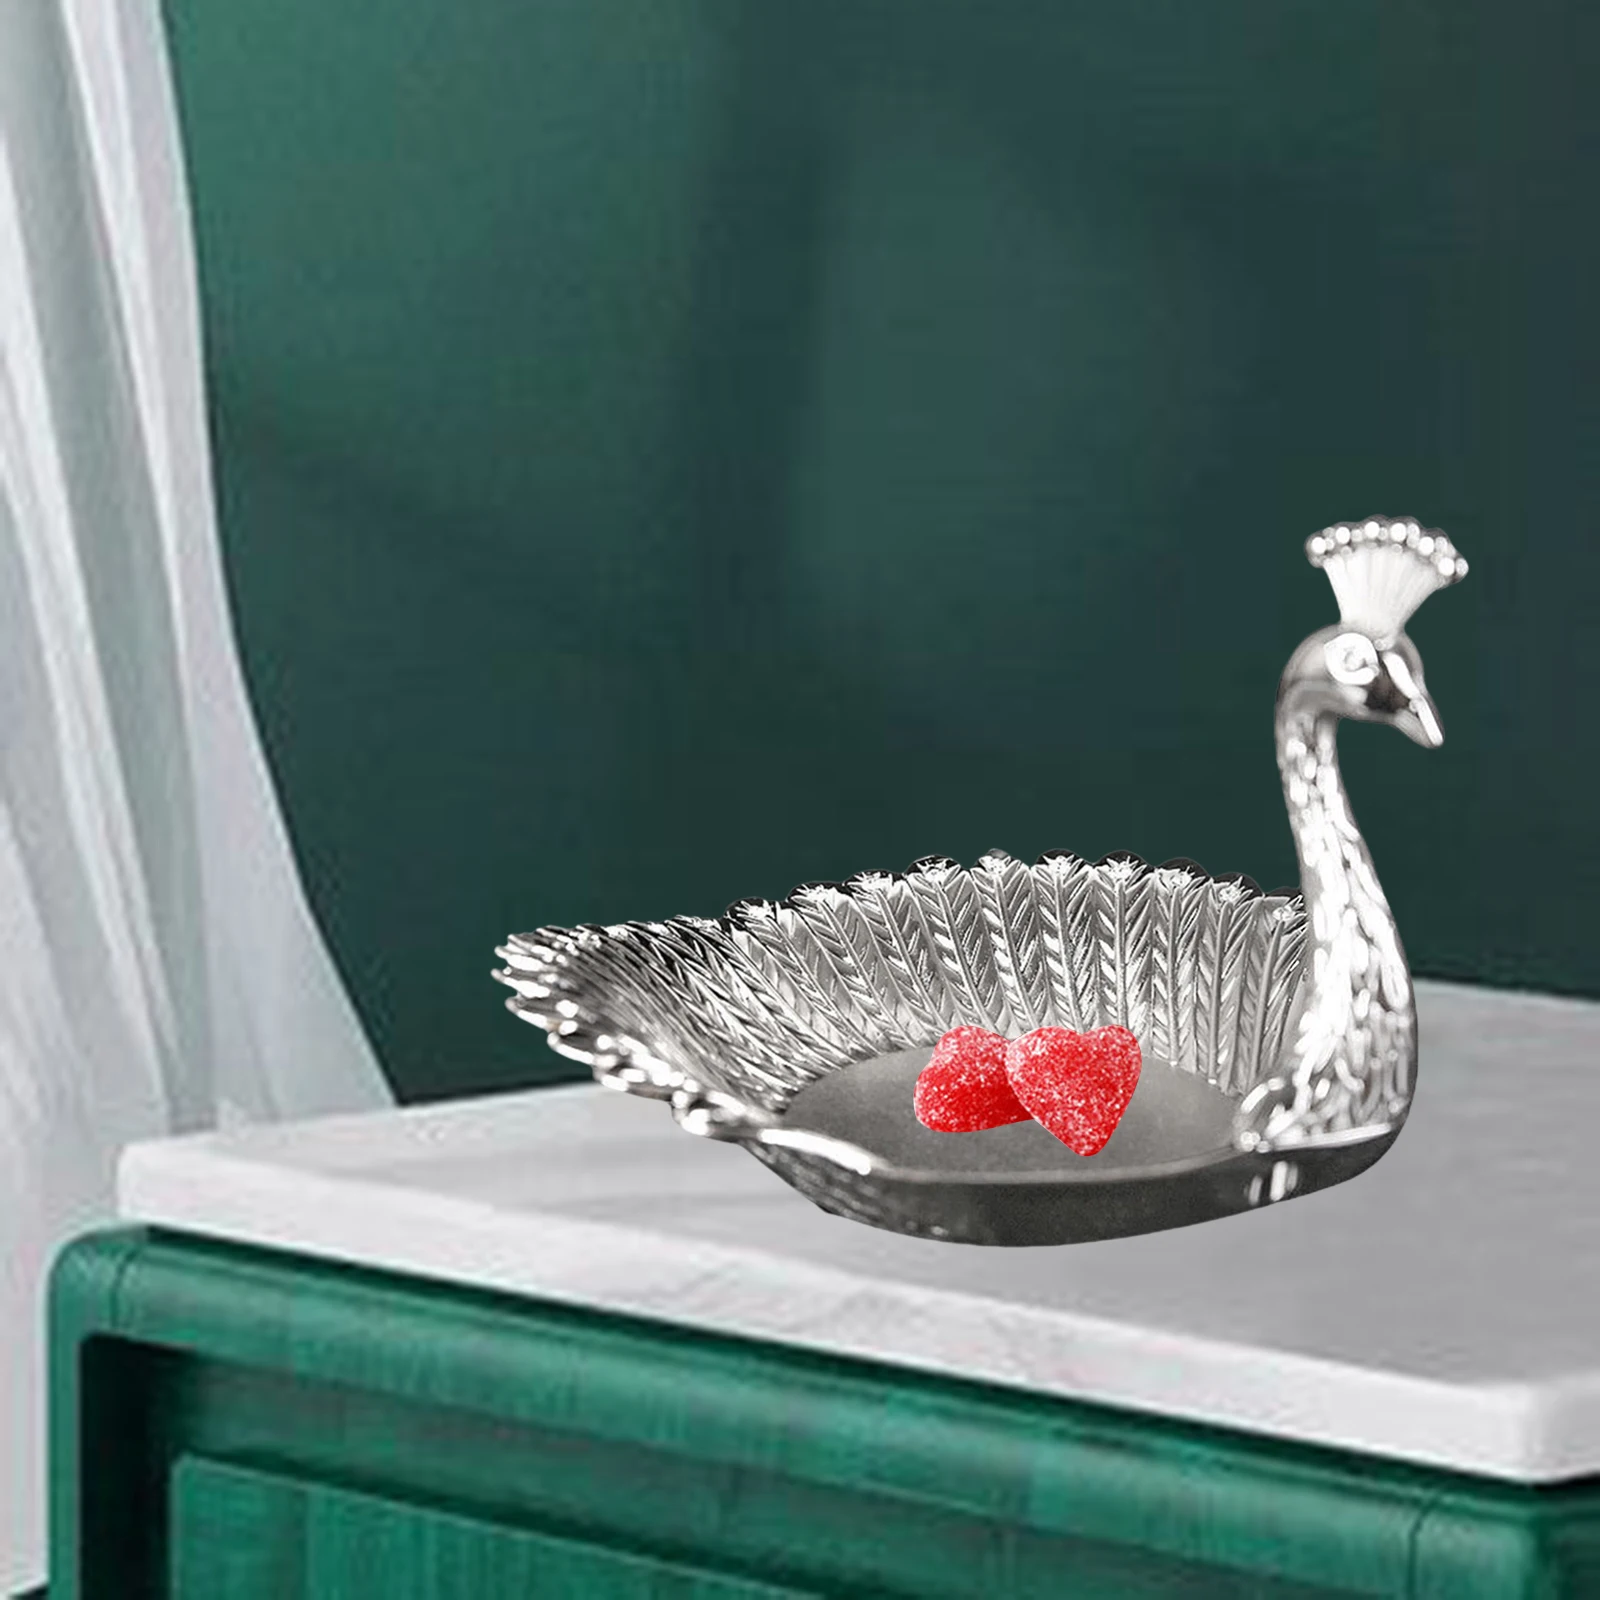 Delicate Metal Swan Shape Fruit Plate Trinket Ring Display Dish Dessert Candy Snack Serving Tray Bowl Platter Table Home Decor